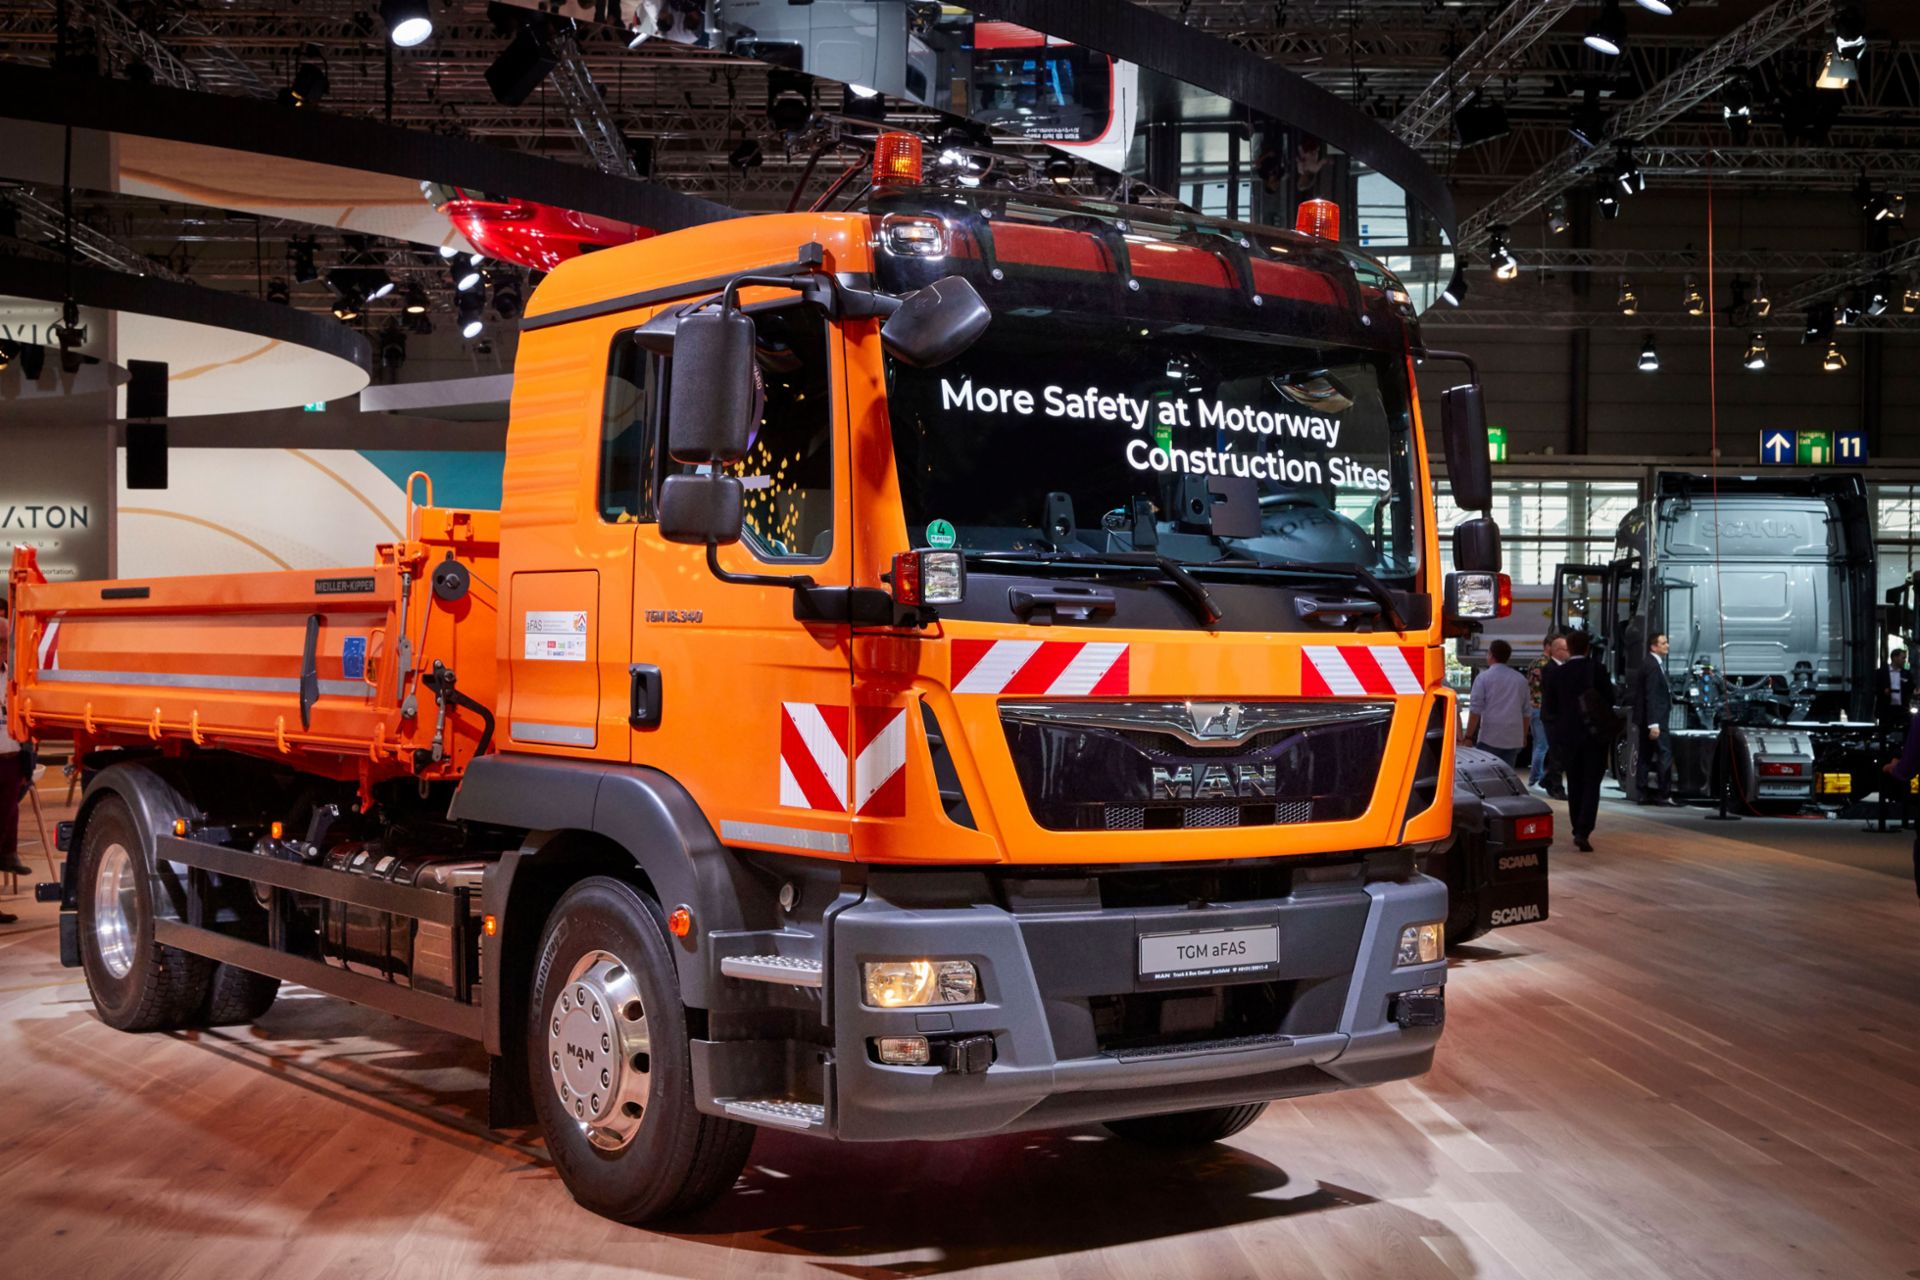 MAN’s autonomous and unmanned safety vehicle aFAS at the IAA 2018